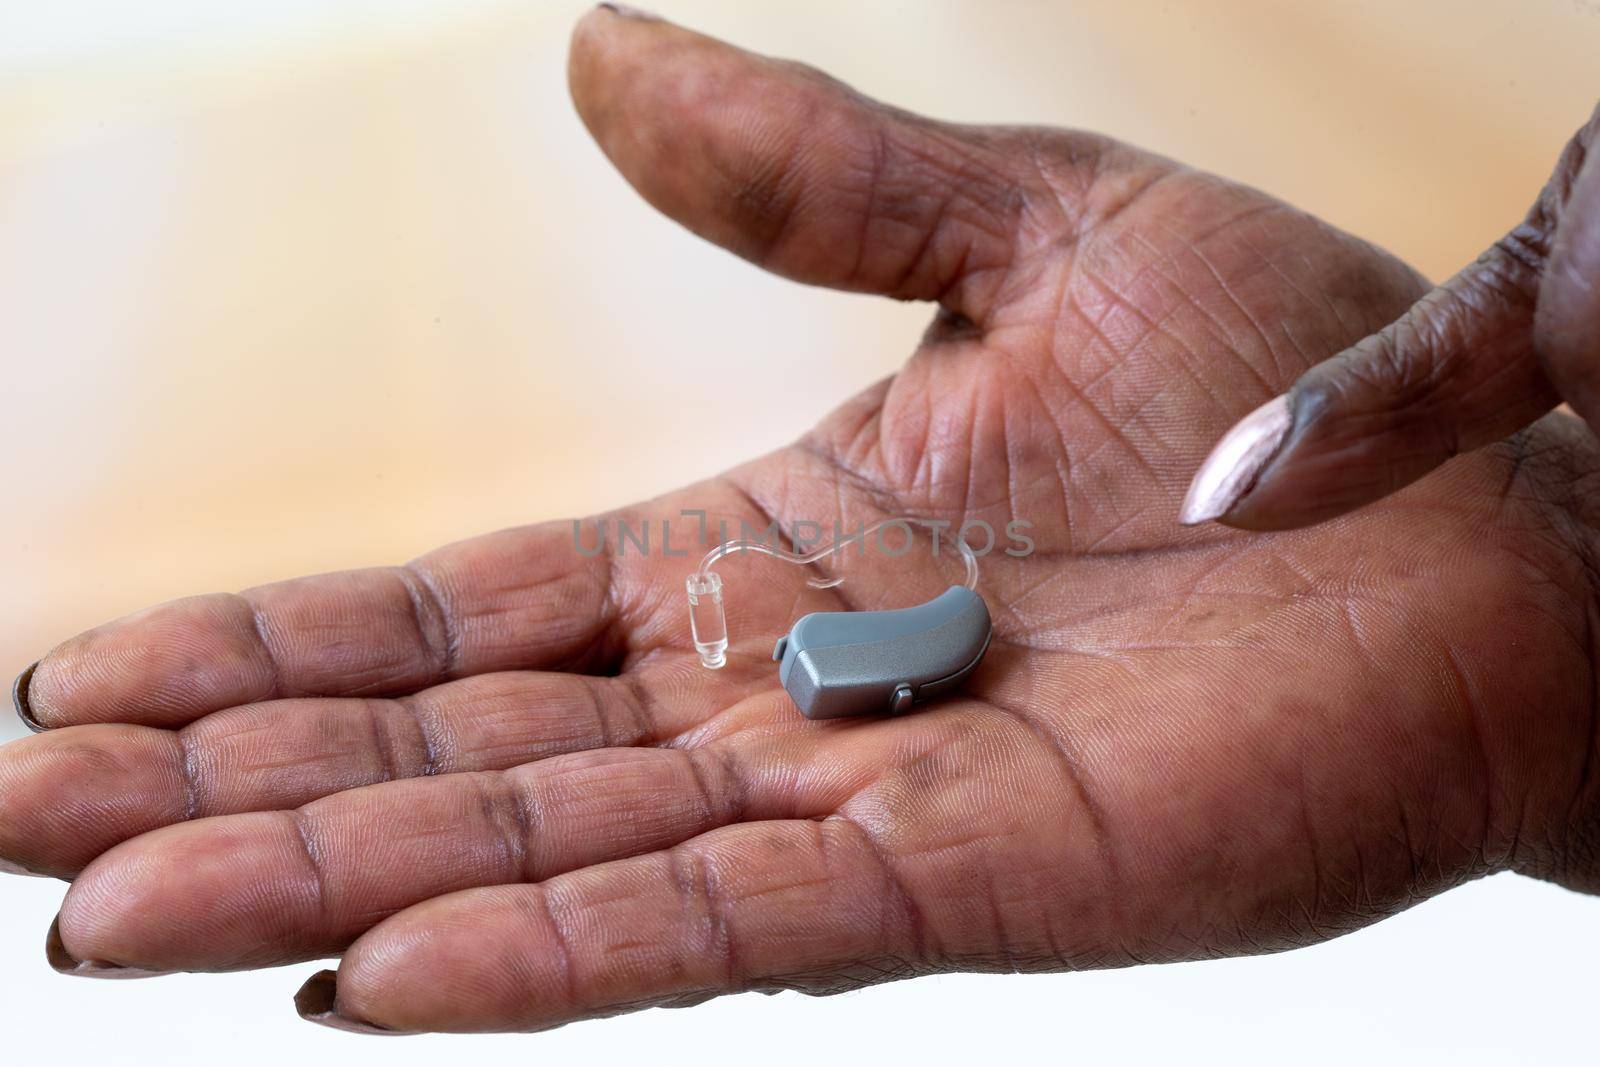 Hearing aid in close-up in the hollow of the hand